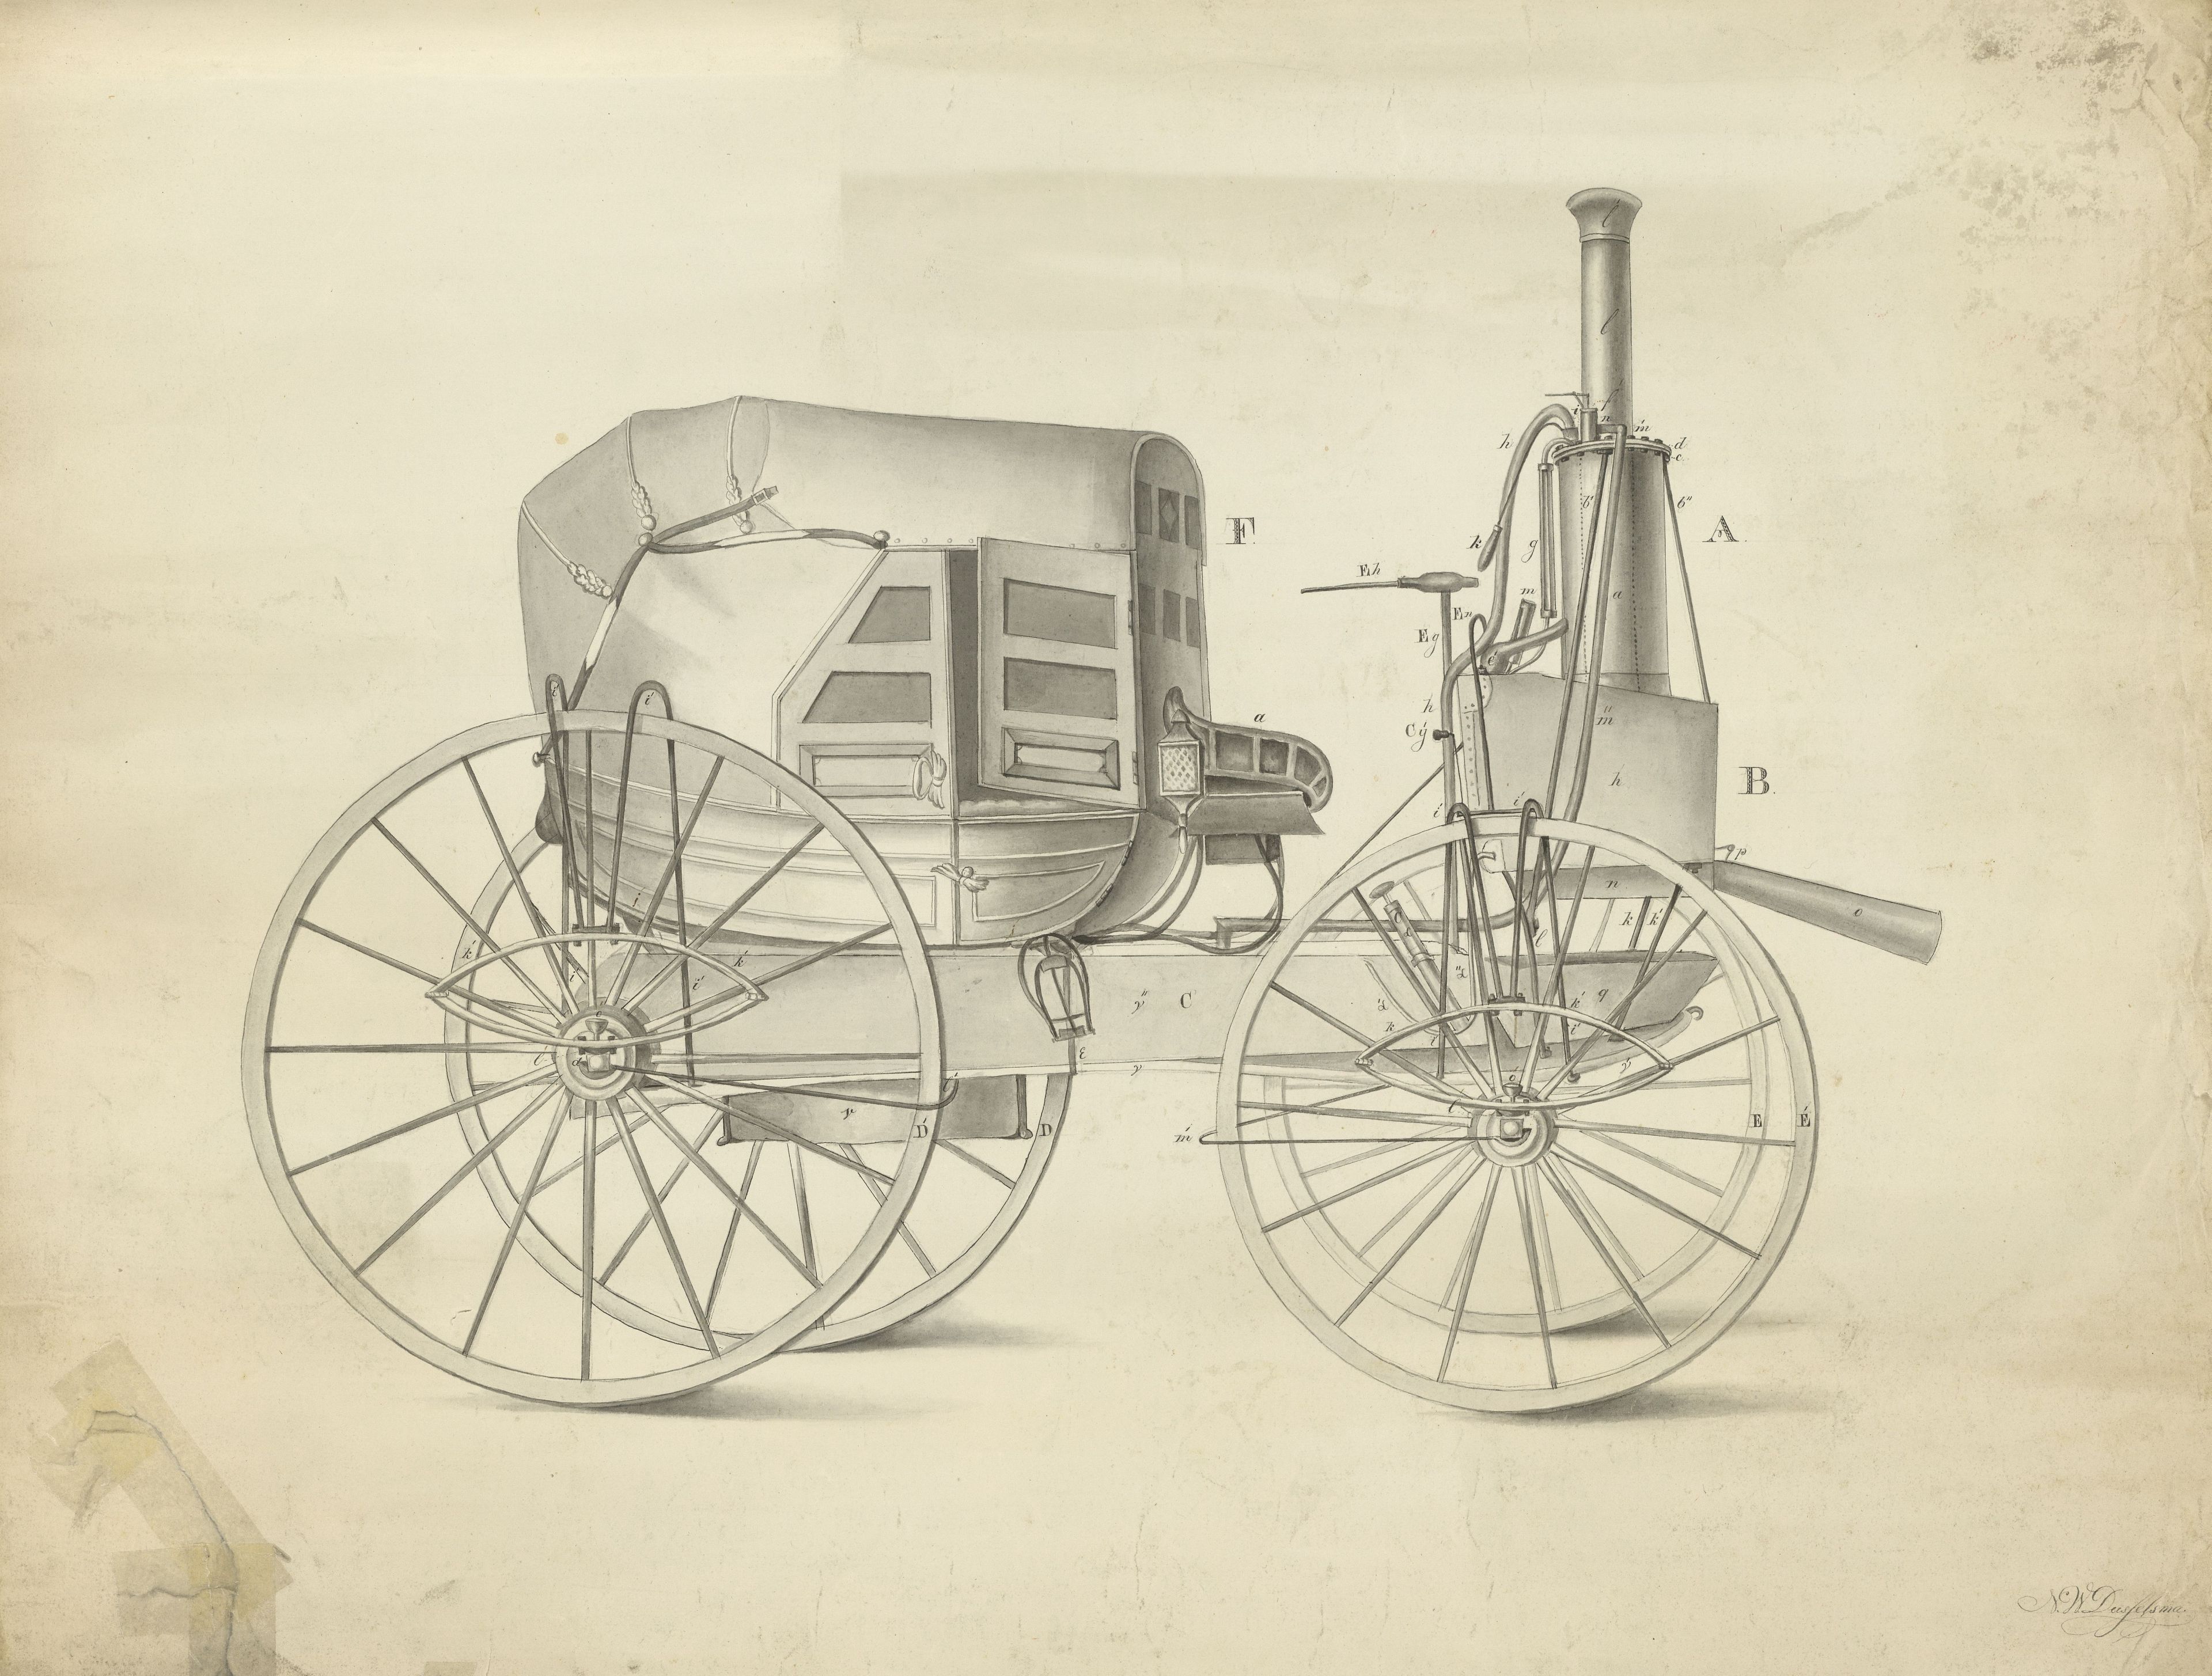 Drawing of Stratingh’s steam-powered vehicle